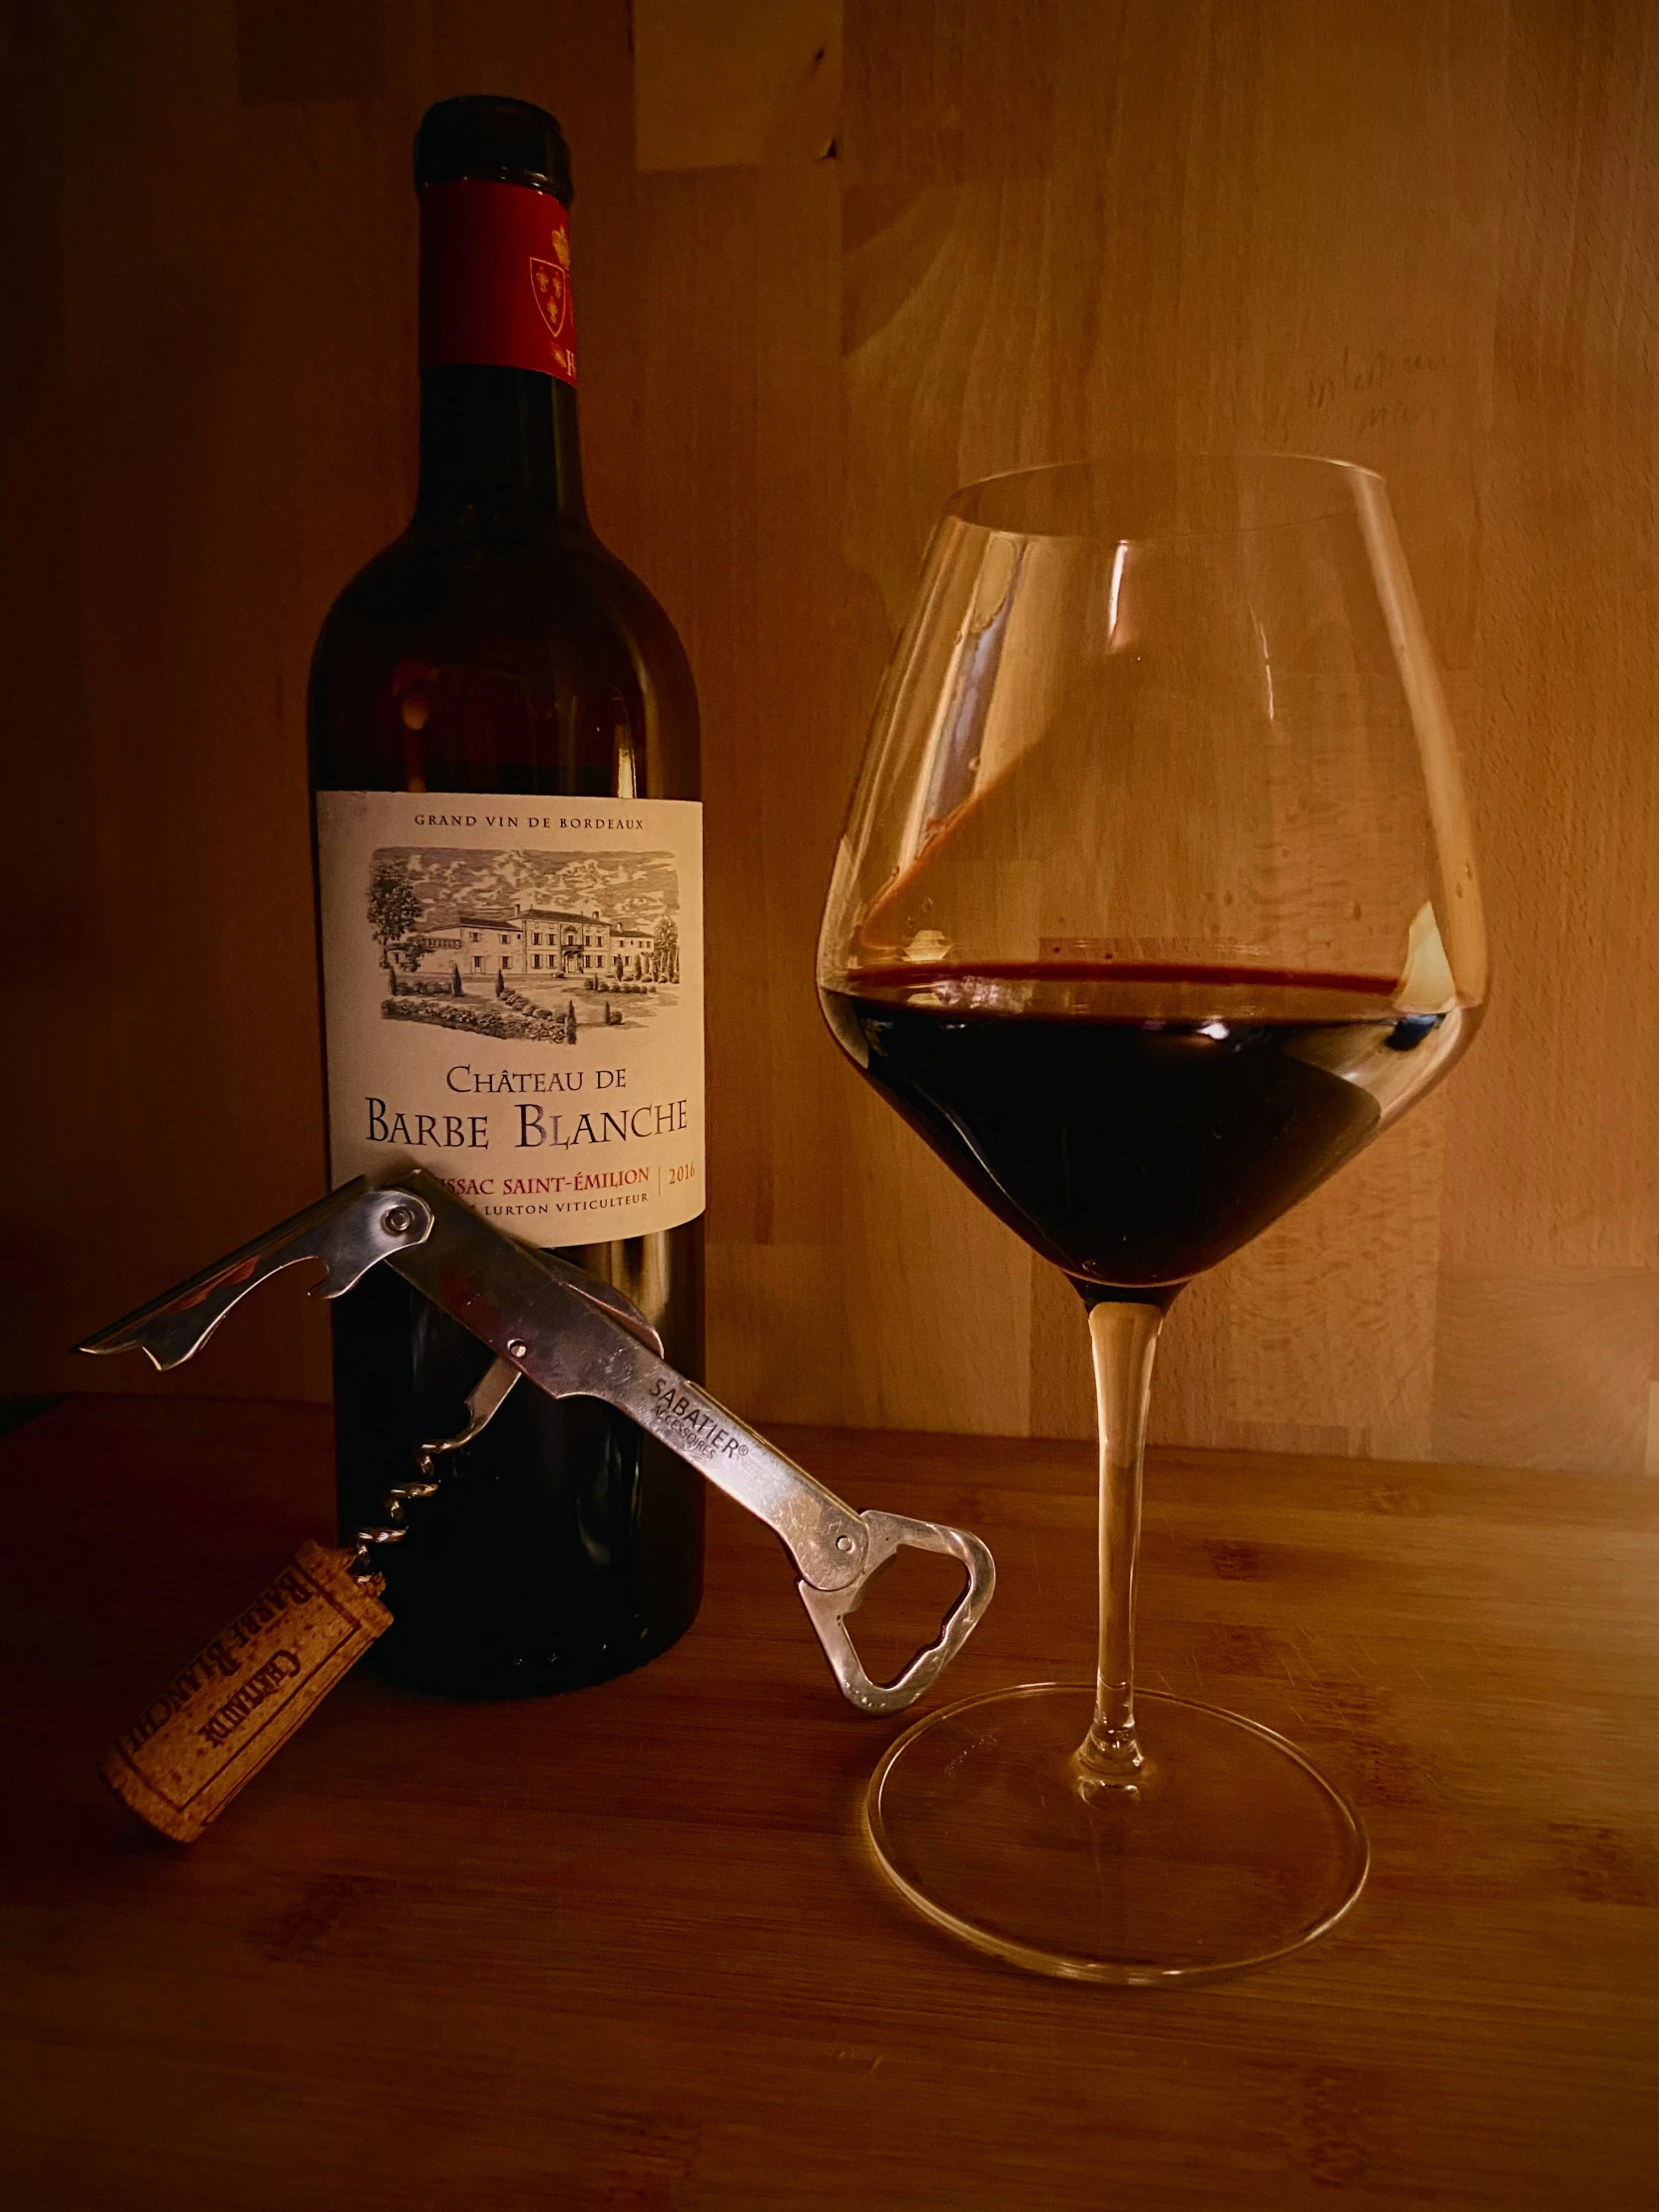 an image of a bottle and glass with wine